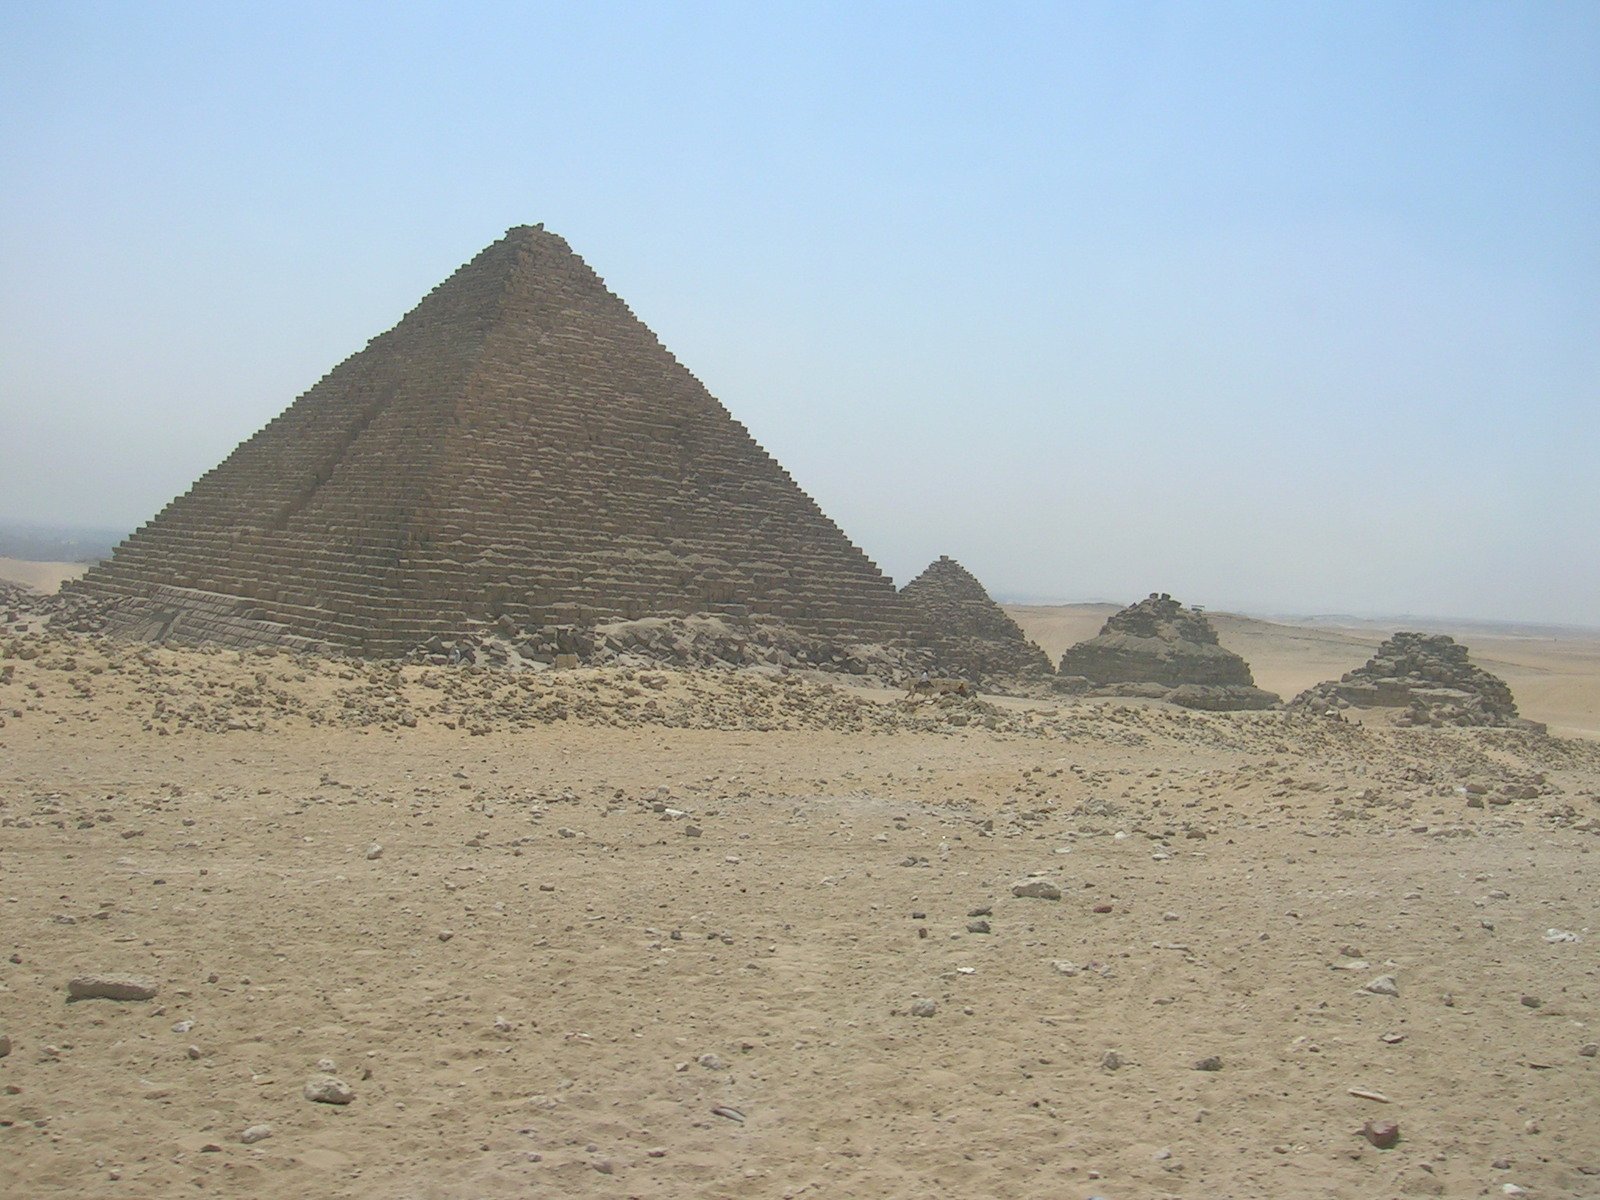 a very large pyramid sitting in the middle of a desert